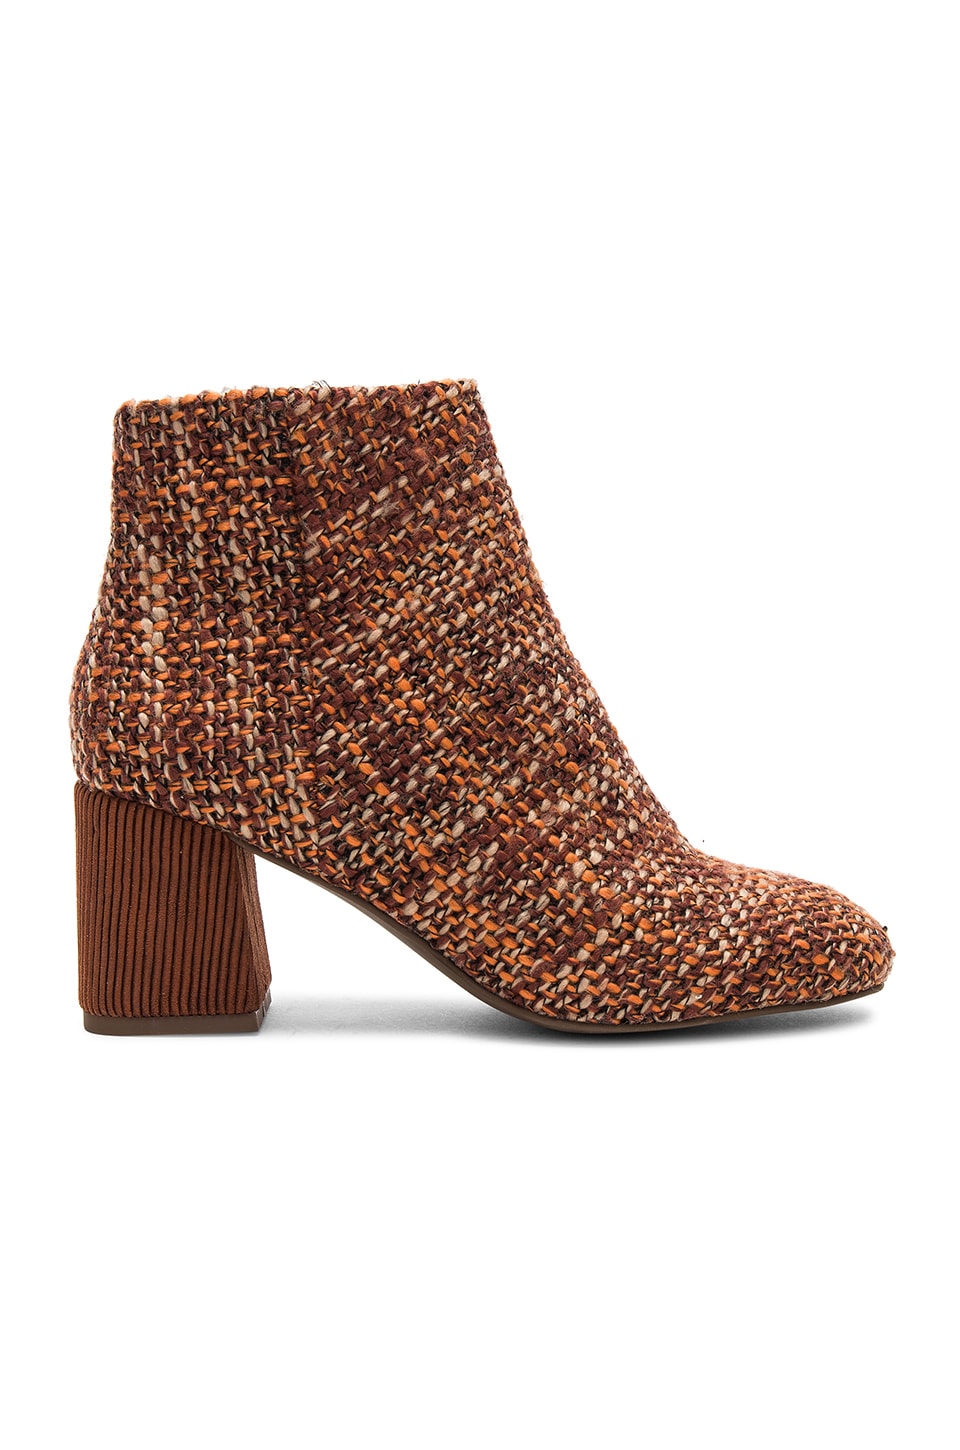 Seychelles Audition Bootie in Whiskey 